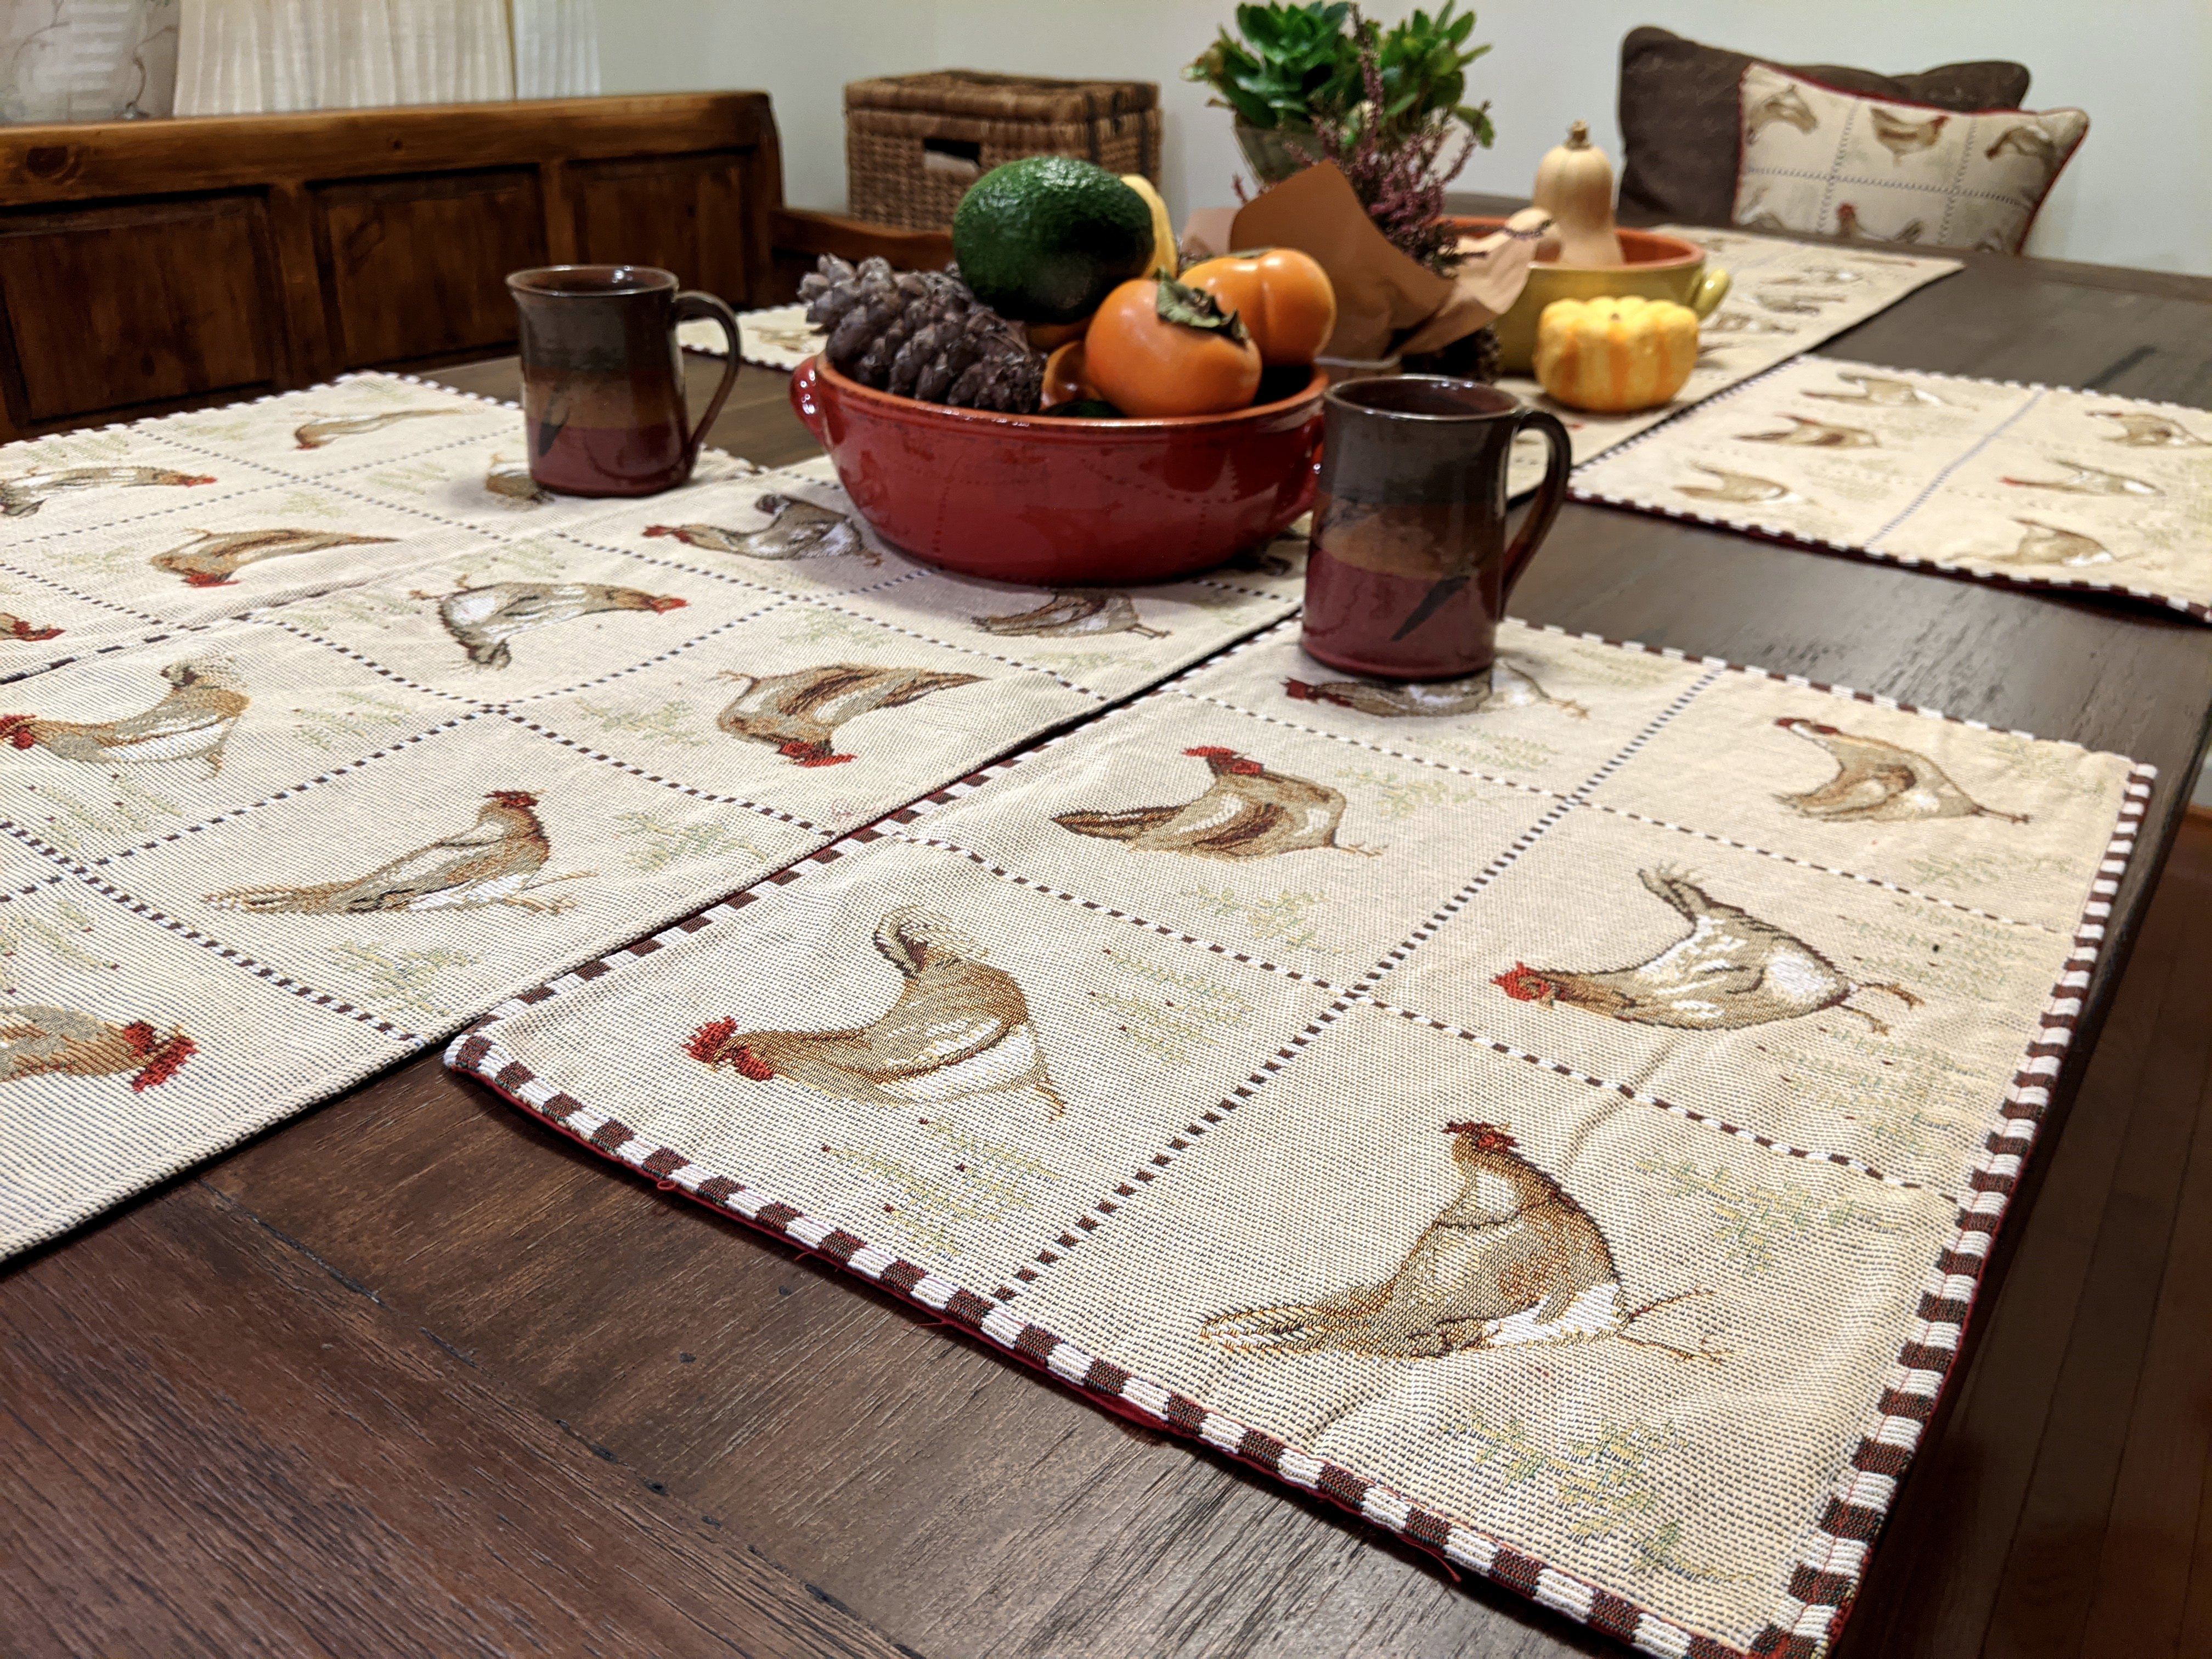 Tache Country Farmhouse Rooster Hens Woven Tapestry Placemat Set (13139PM) - Tache Home Fashion